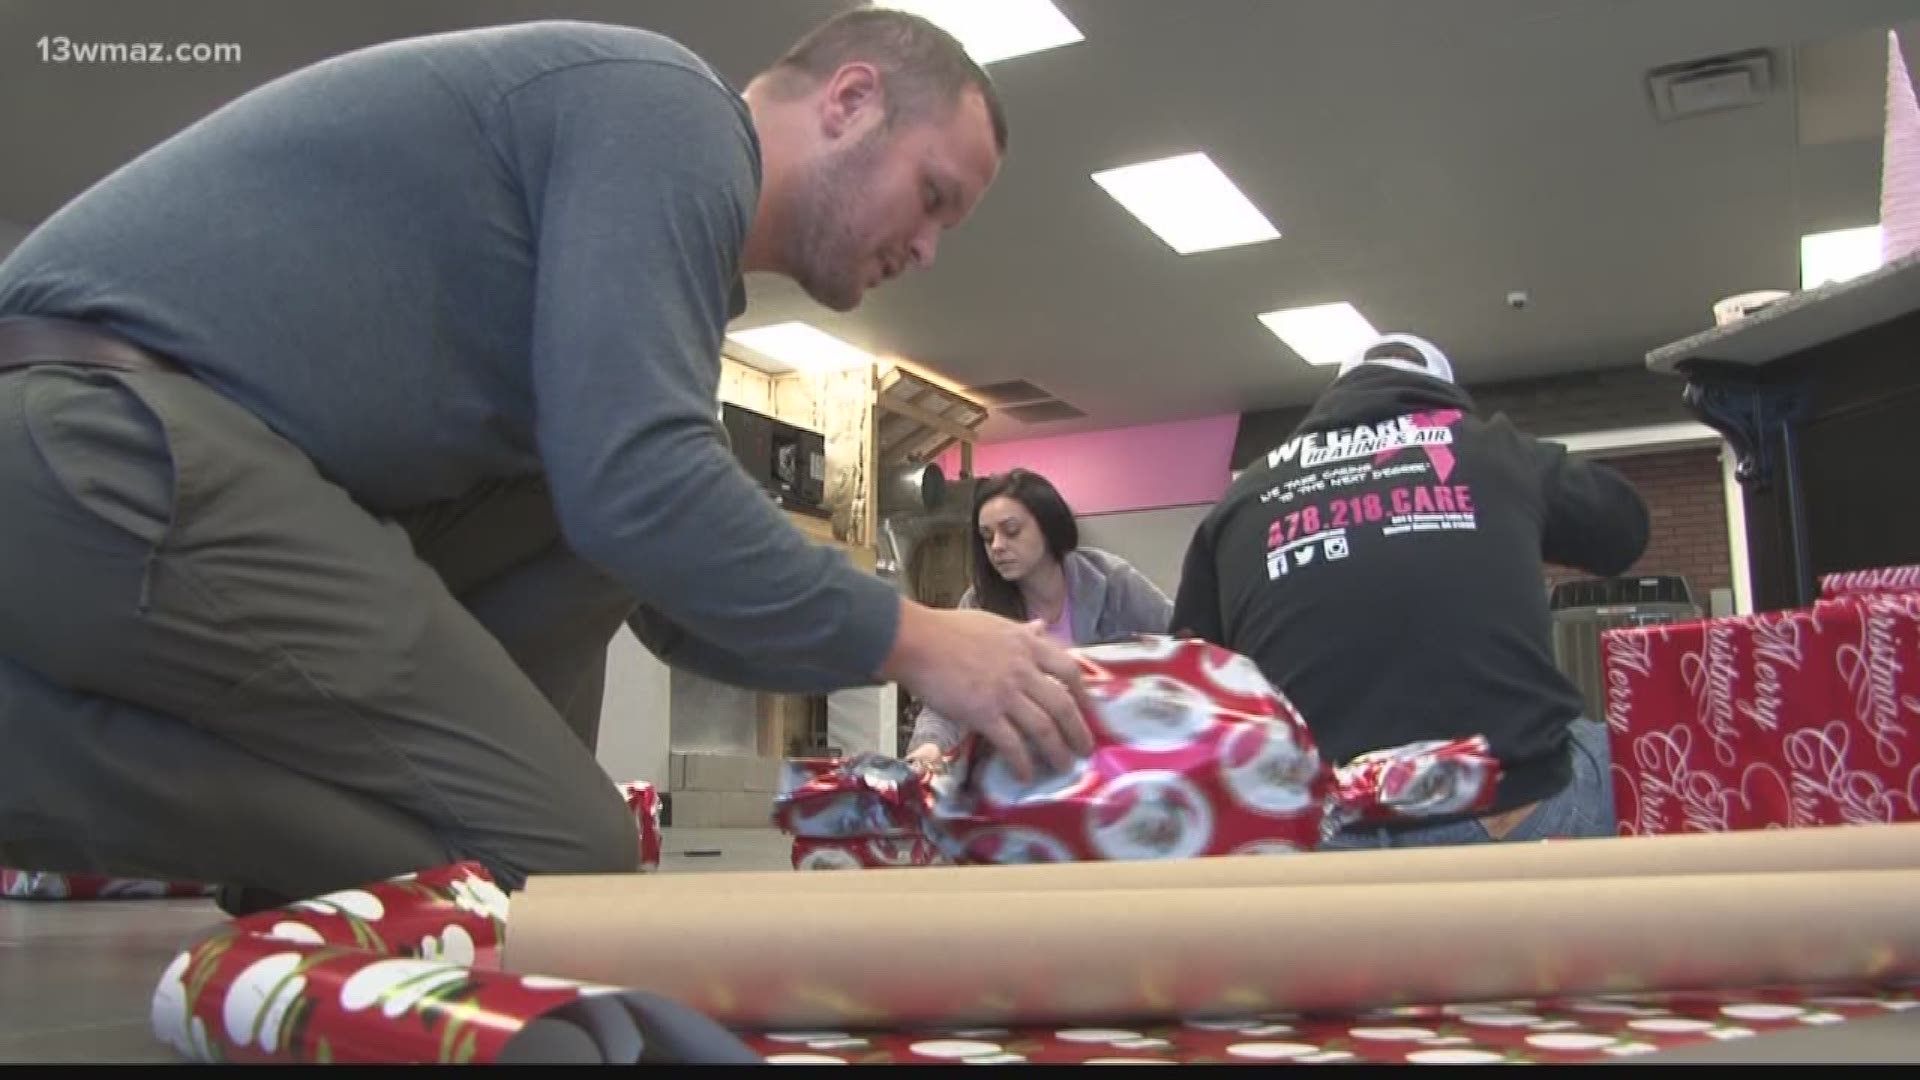 Brothers replace 7-year-old's stolen gifts